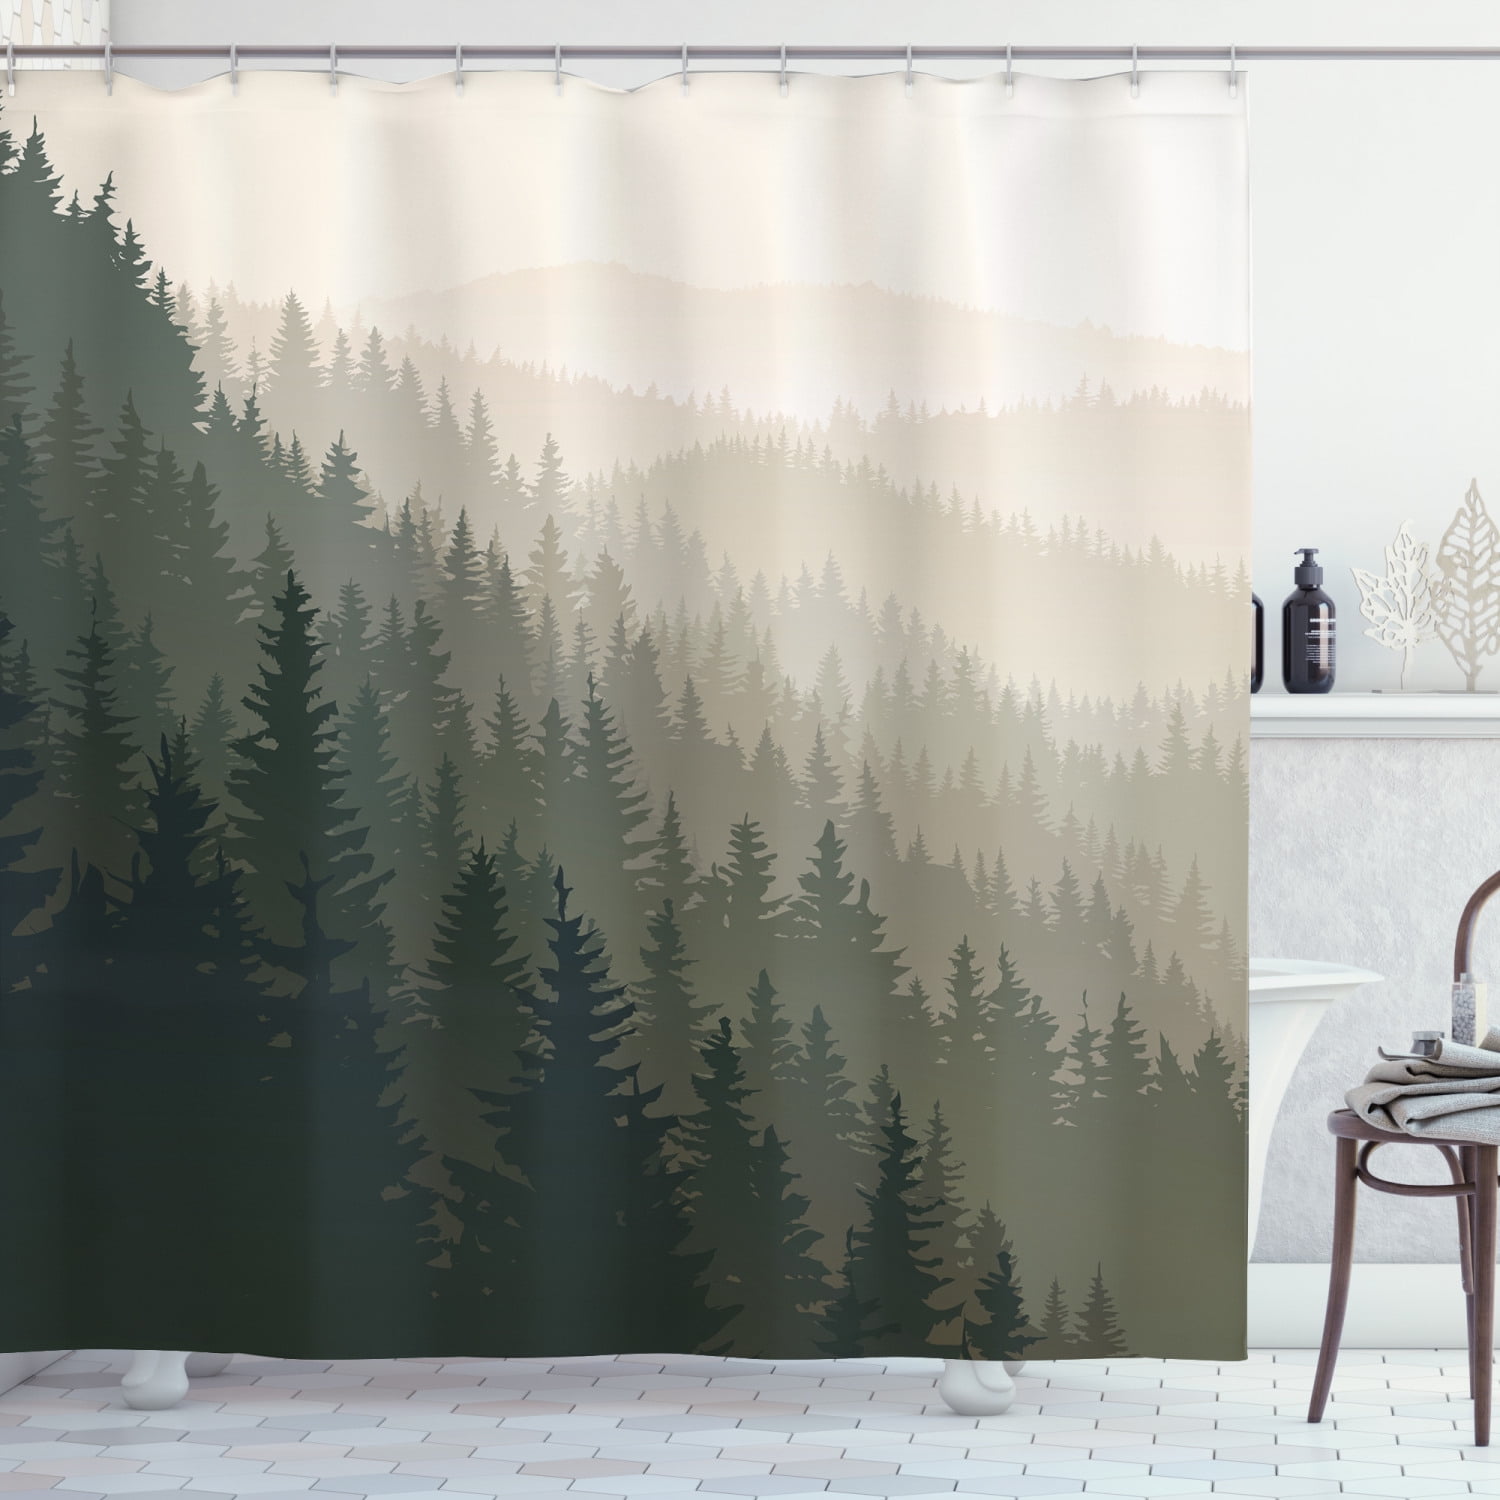 Green Forests Waterproof Bathroom Polyester Shower Curtain Liner Water Resistant 